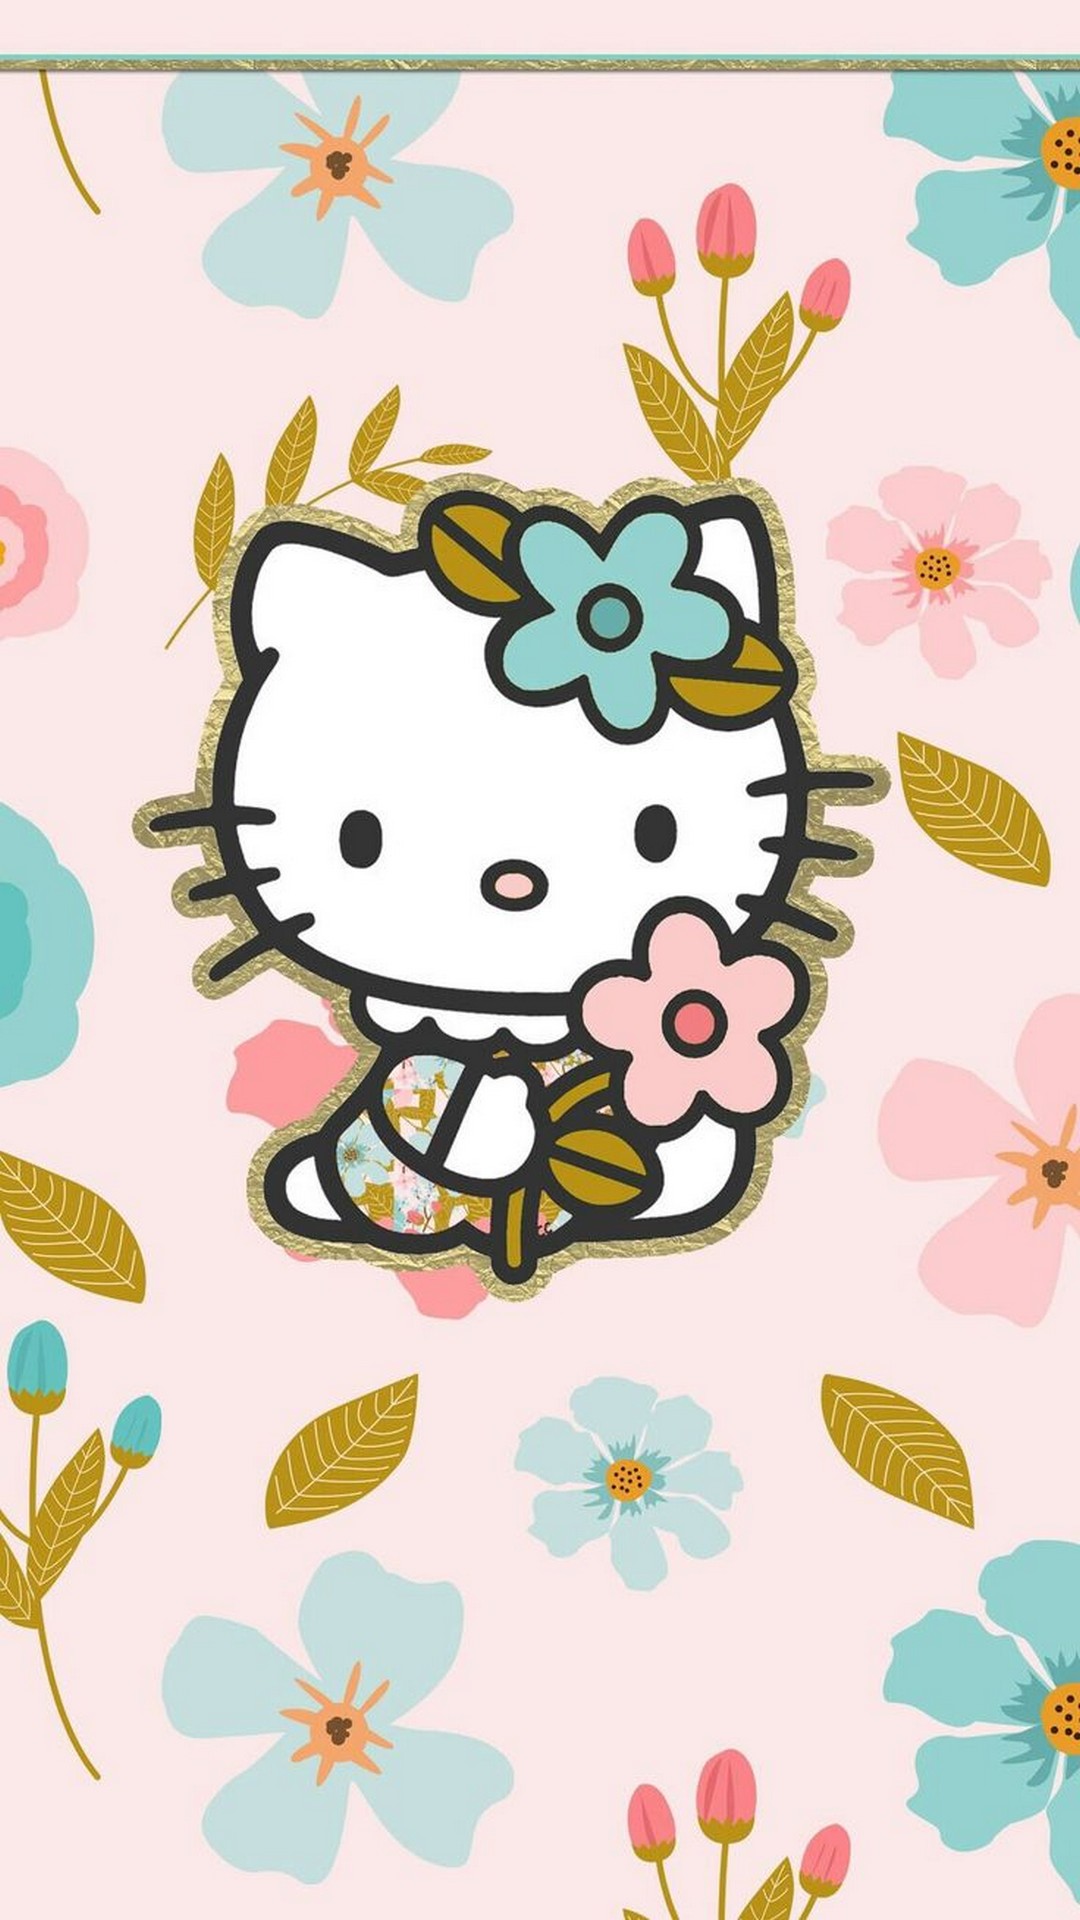 Hello Kitty Wallpaper iPhone with image resolution 1080x1920 pixel. You can make this wallpaper for your iPhone 5, 6, 7, 8, X backgrounds, Mobile Screensaver, or iPad Lock Screen